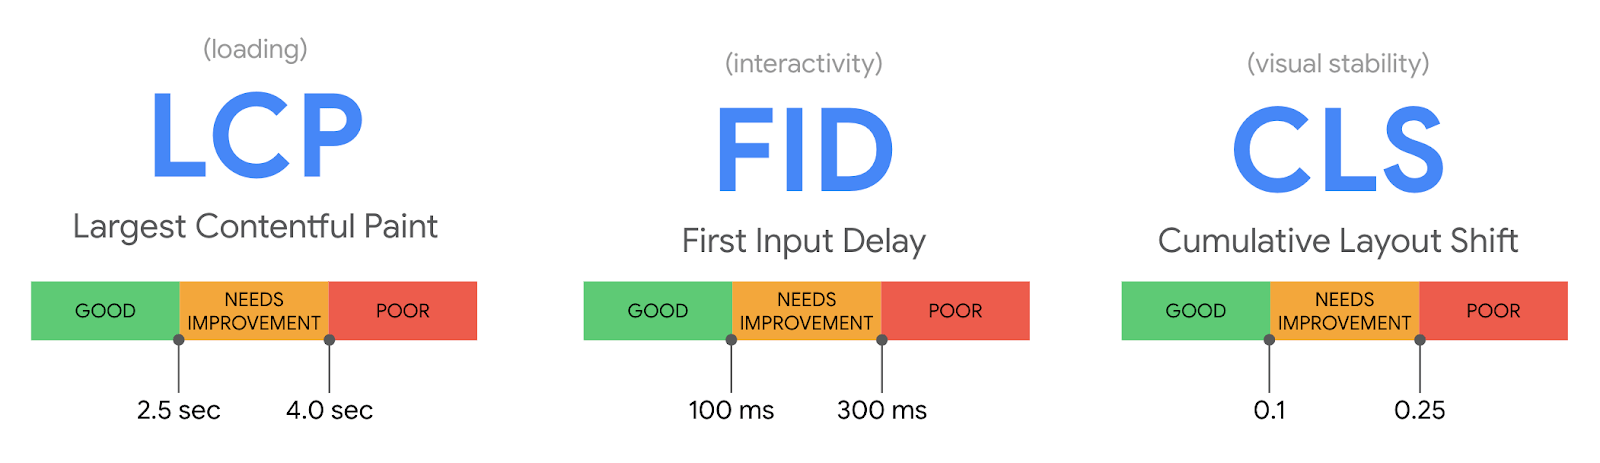 Graphic showing the three elements of Google's new Core Web Vitals, LCP, FID and CLS